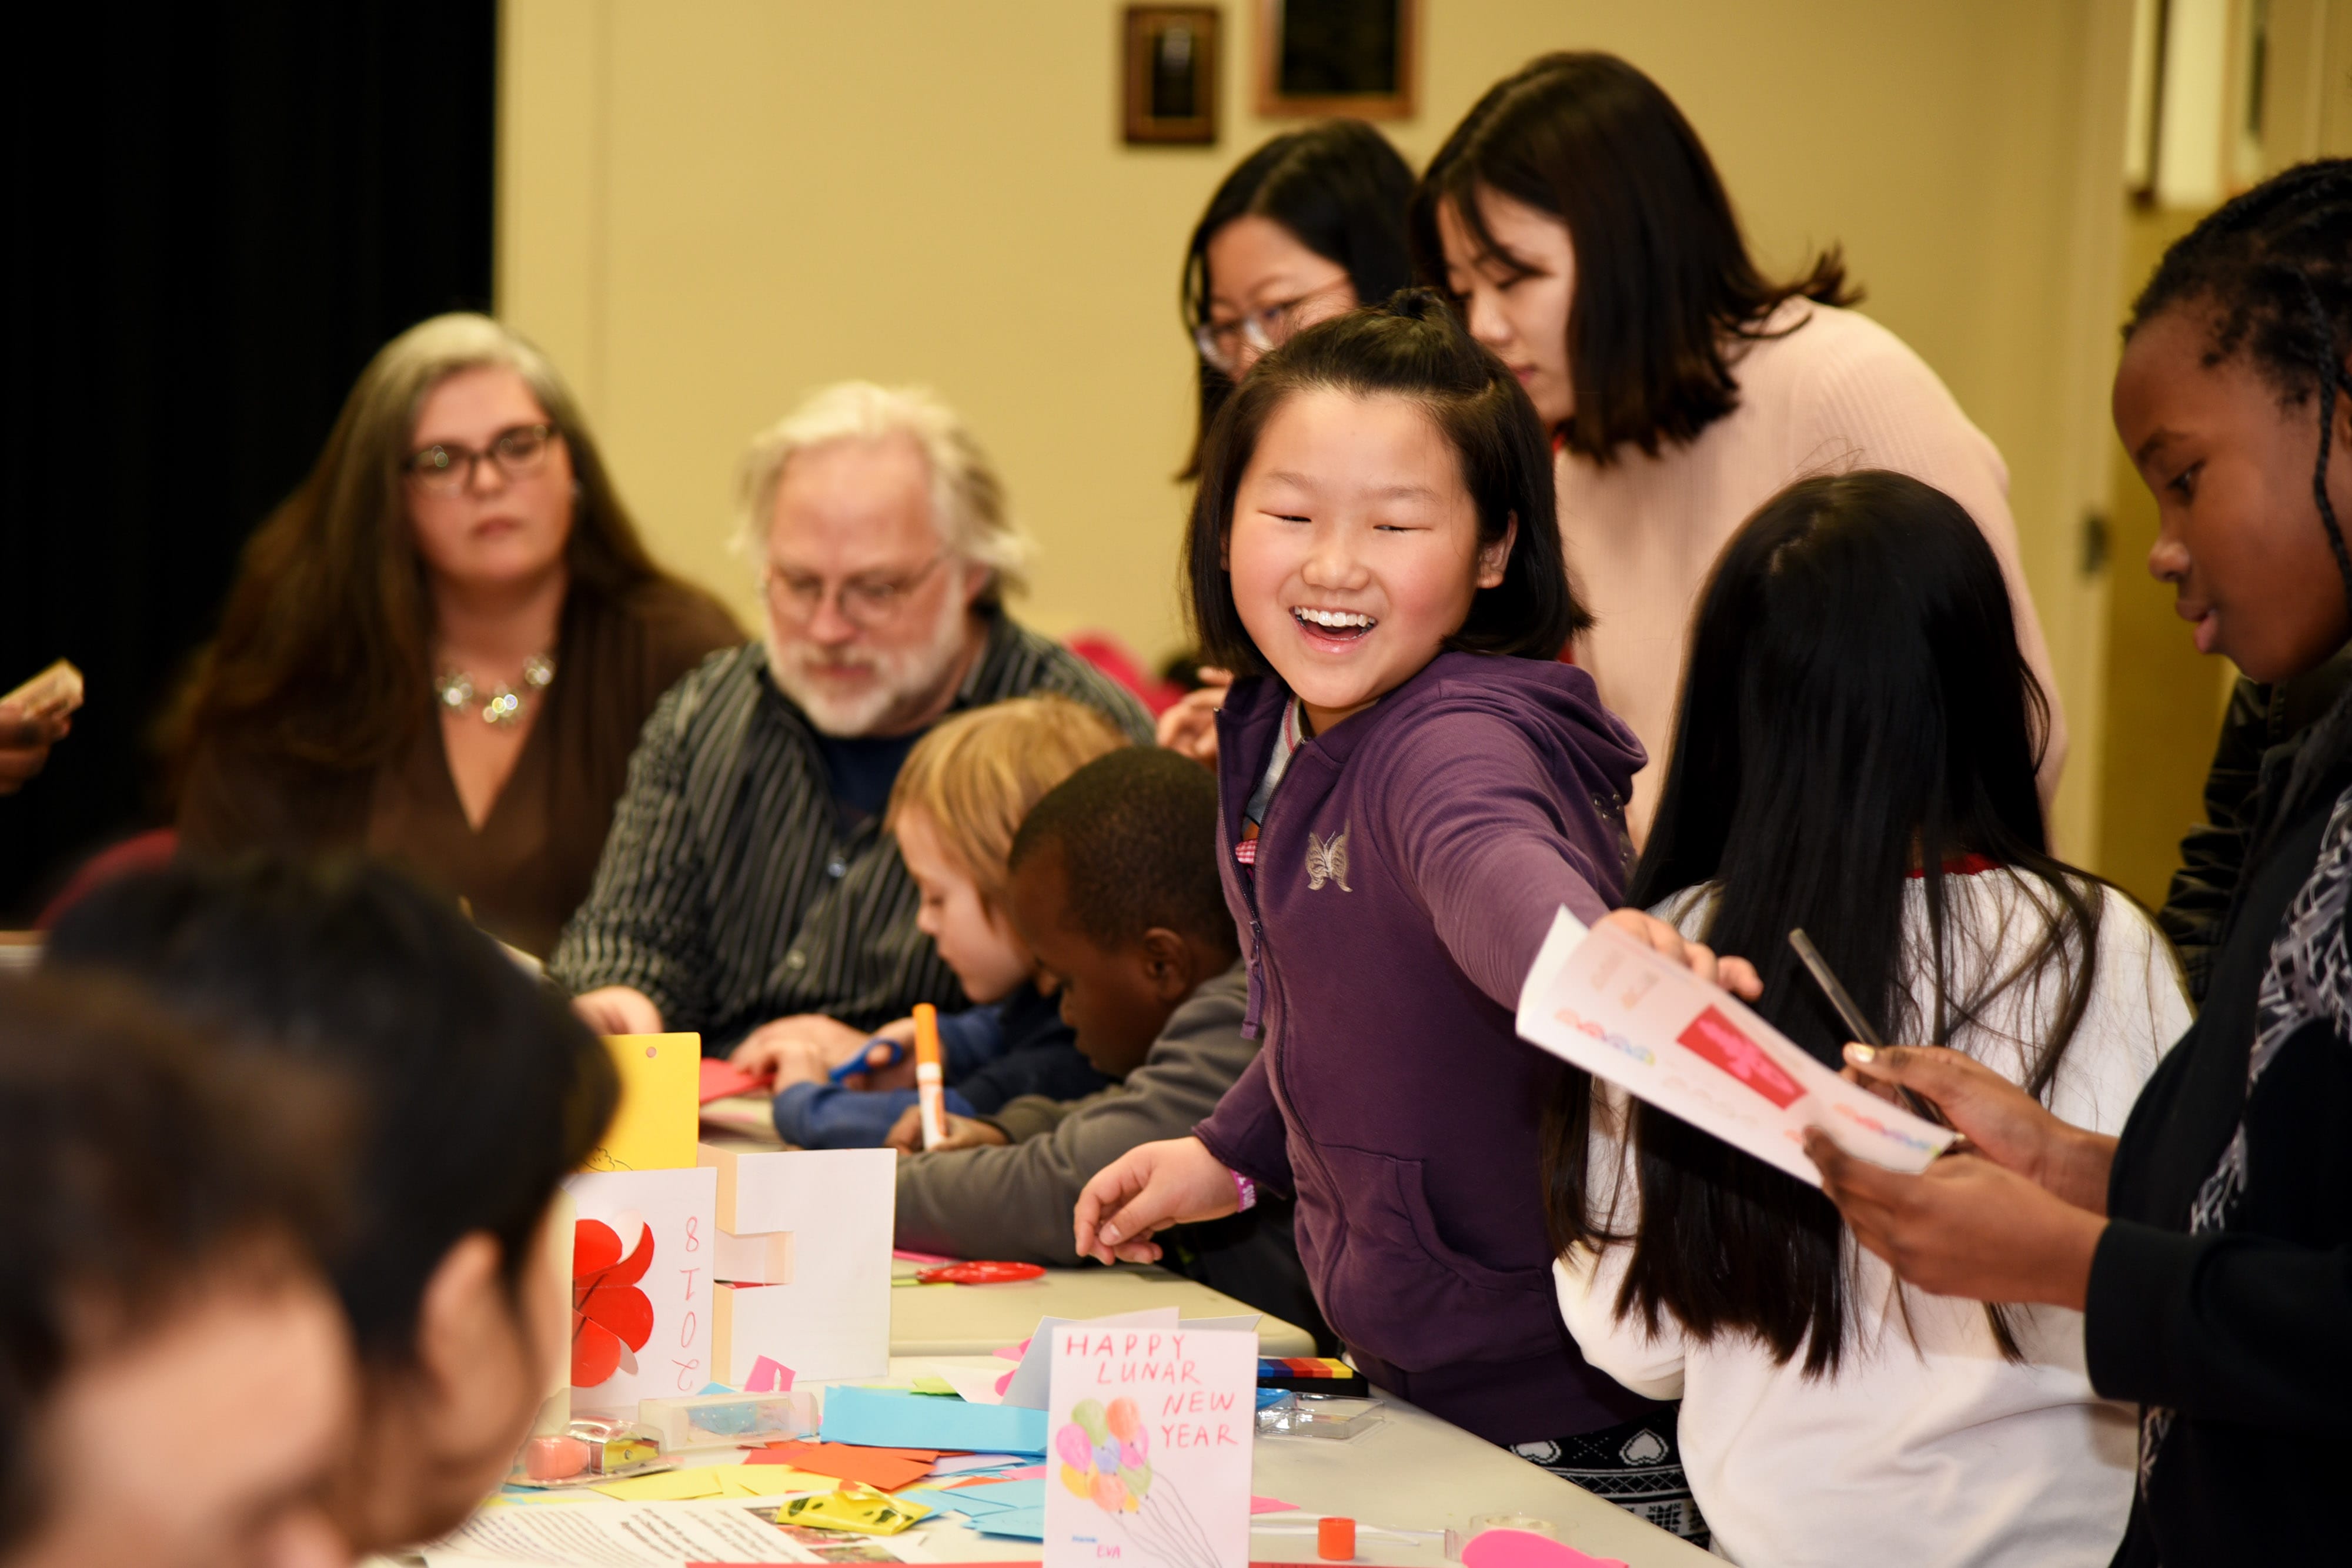 Catherine Xu having fun with friends during the February 15th Chinese New Year Celebration at the Medford Public Library.